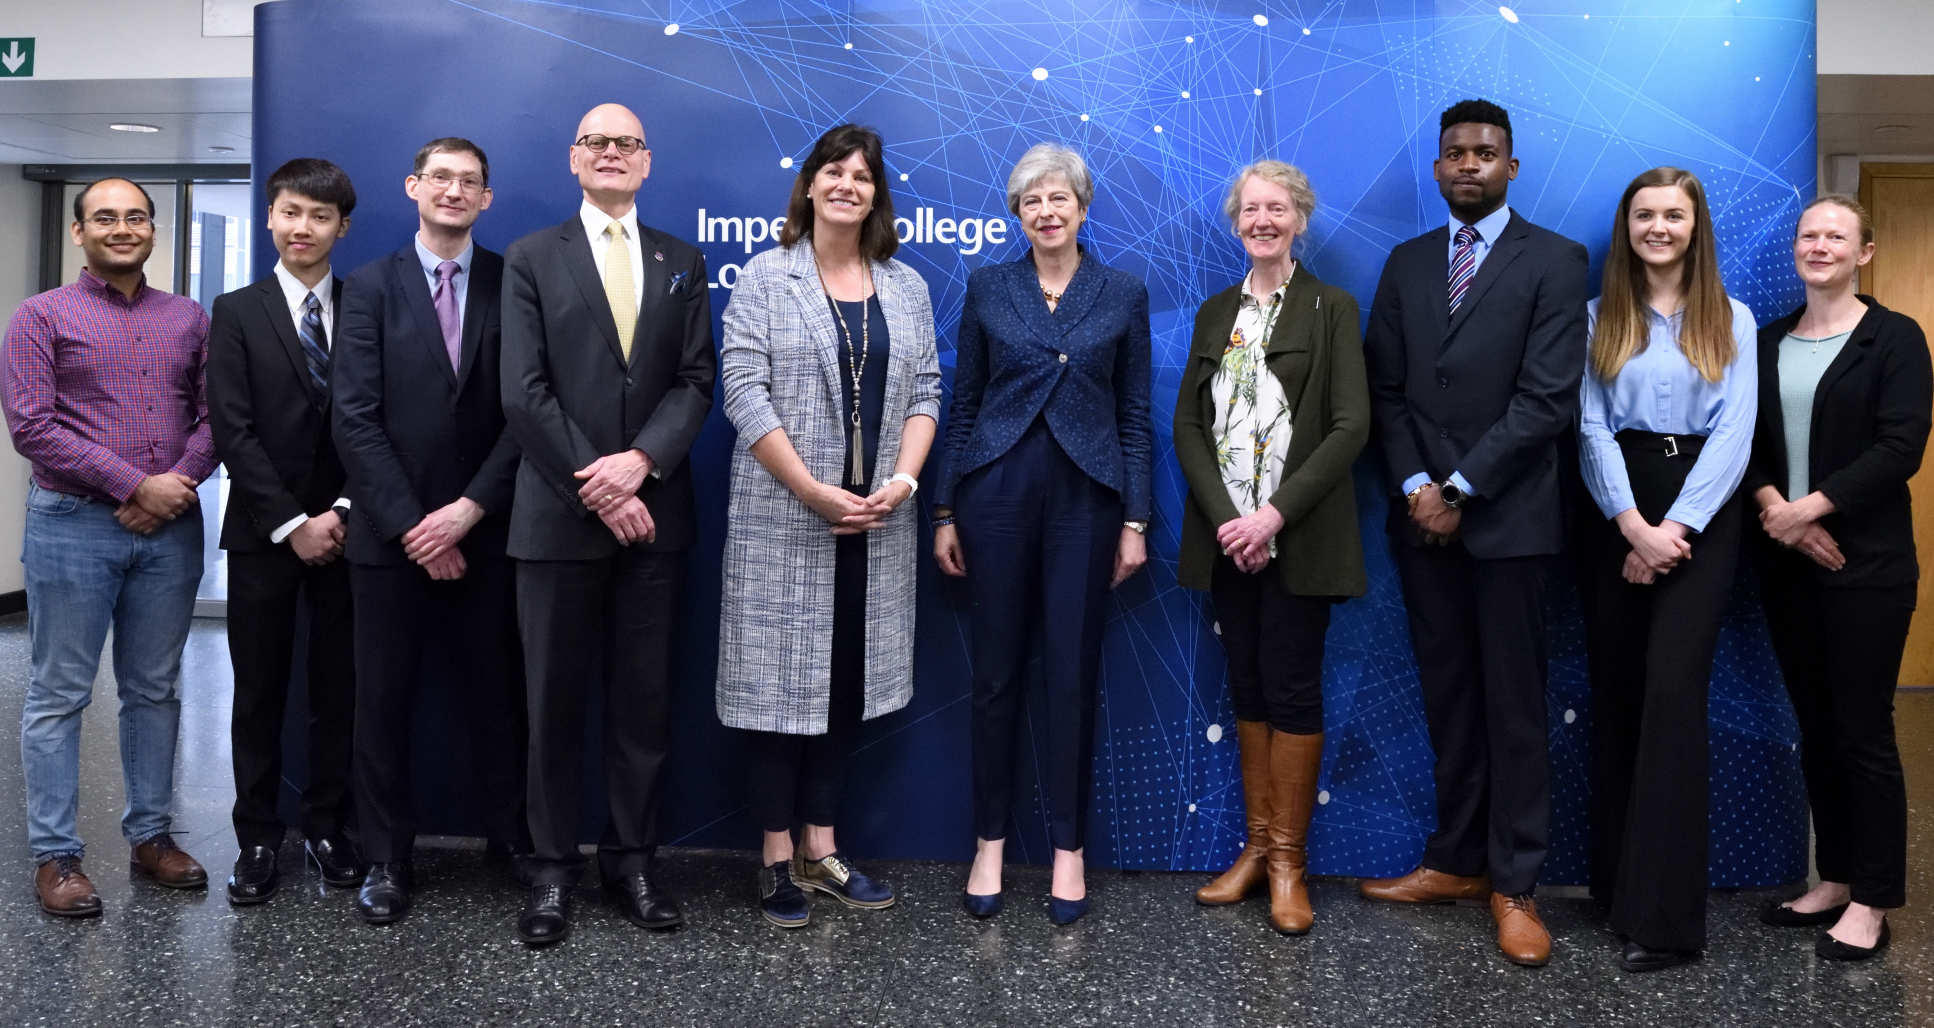 Prime Minister Theresa May with students and academics at Imperial